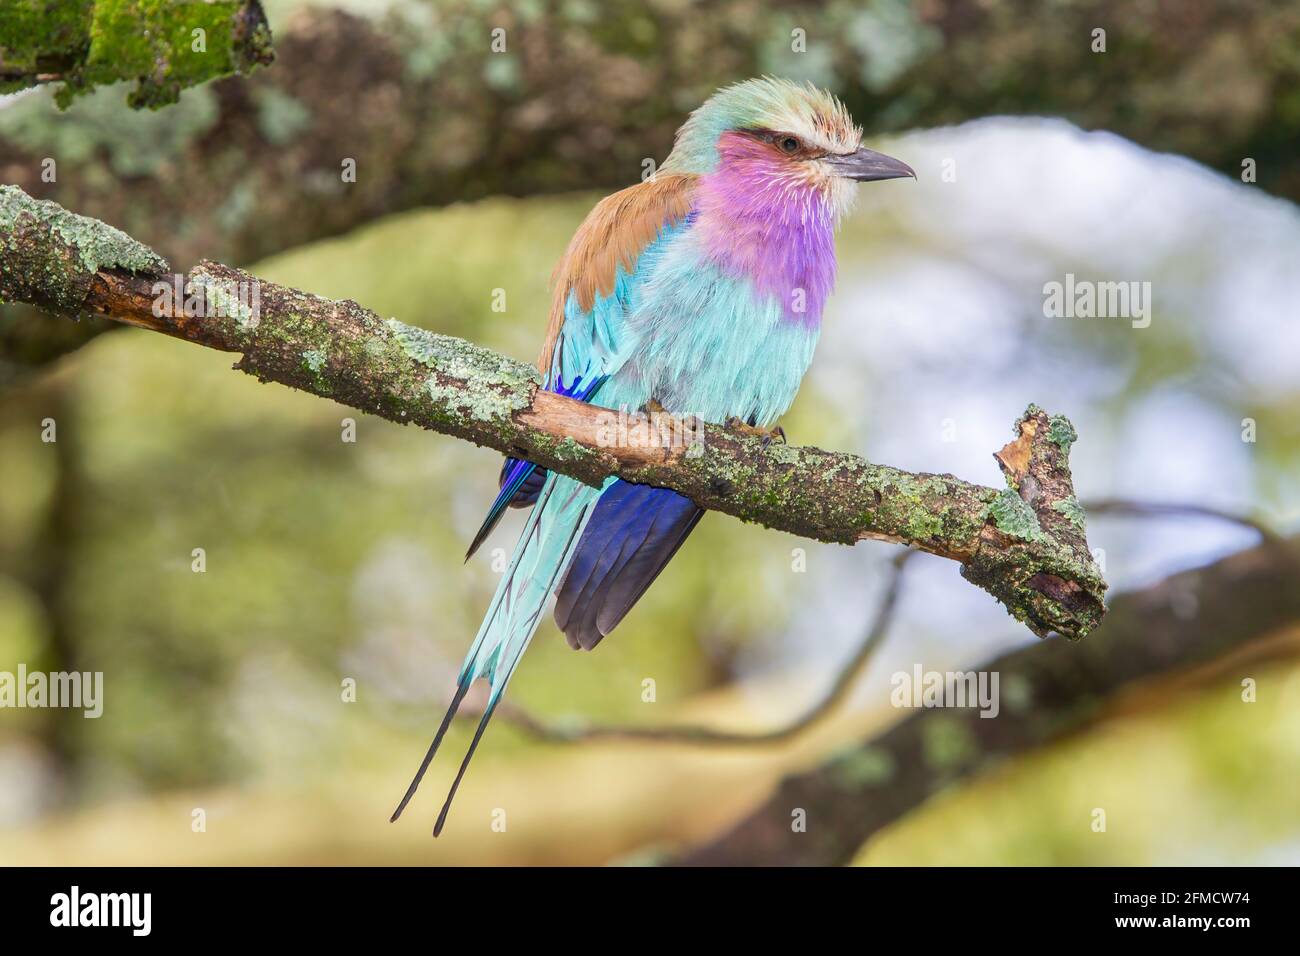 lilac-breasted roller, Coracias caudatus, single adult perched on branch of tree, Masai Mara, Kenya, Africa Stock Photo